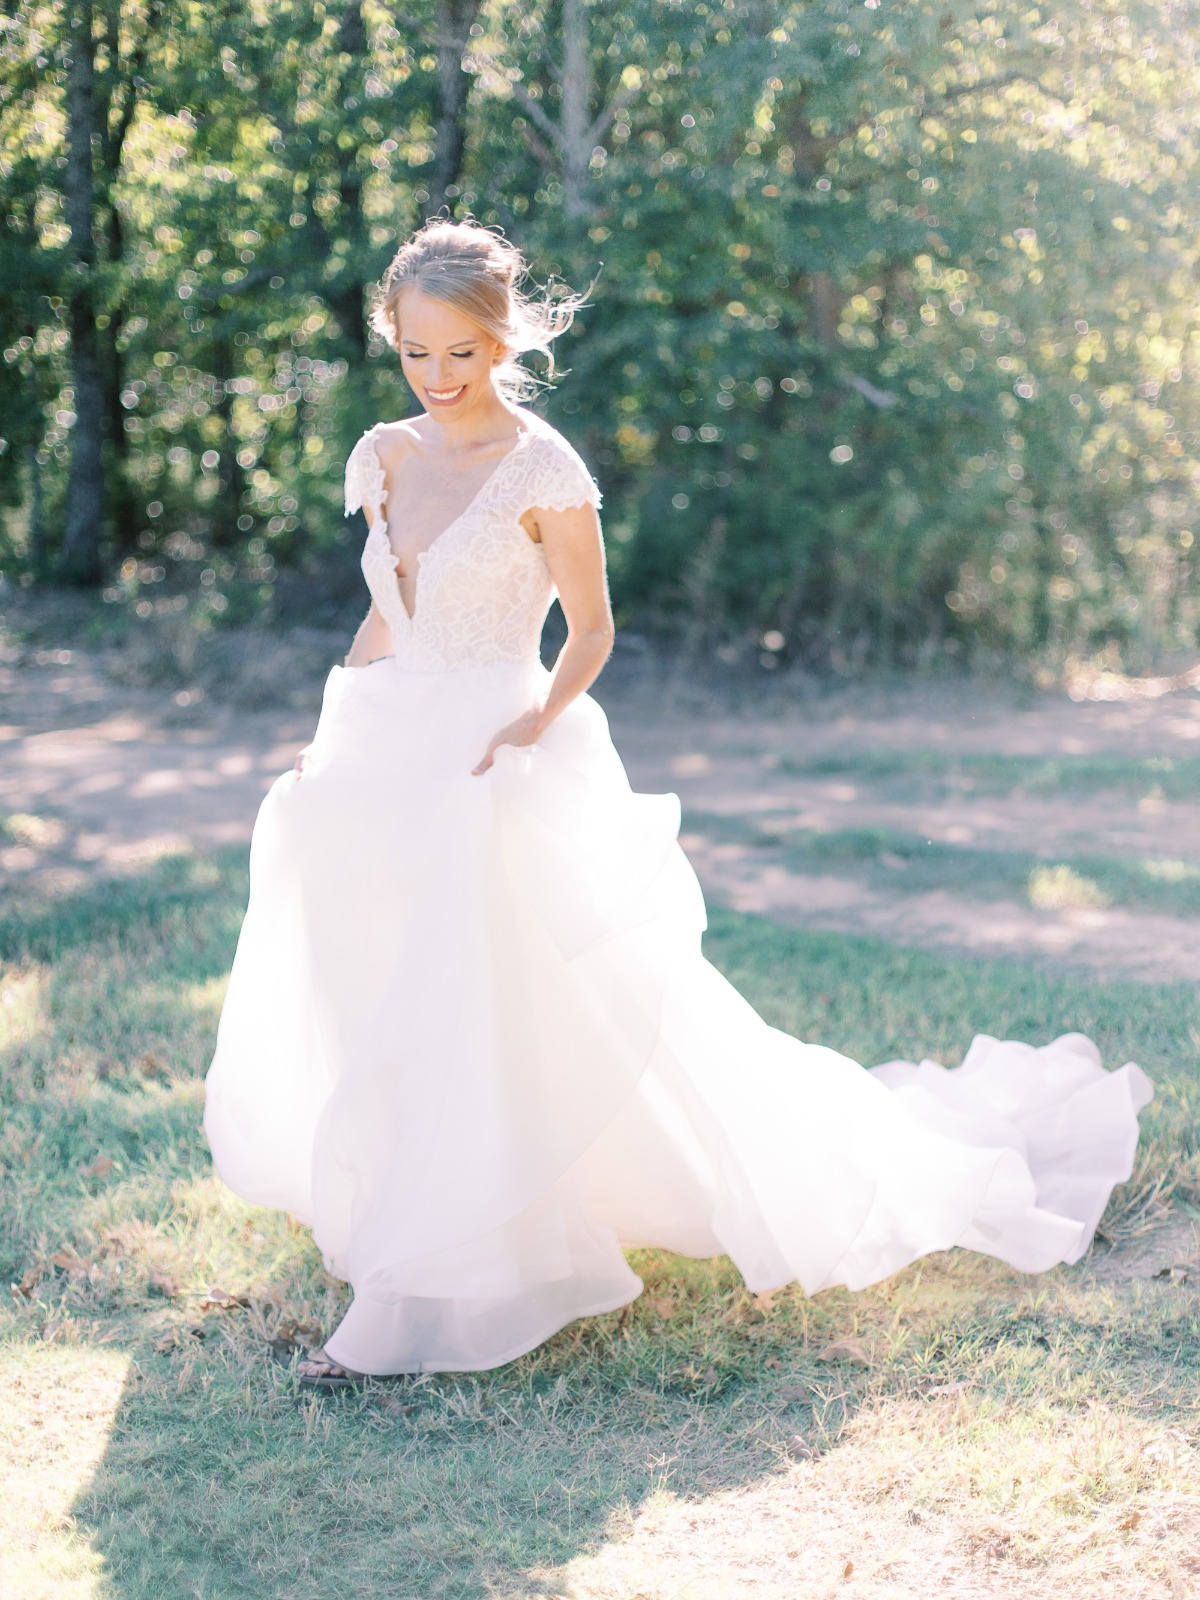 BLUSH by Hayley Paige Style #WILLOW cap sleeve ballgown